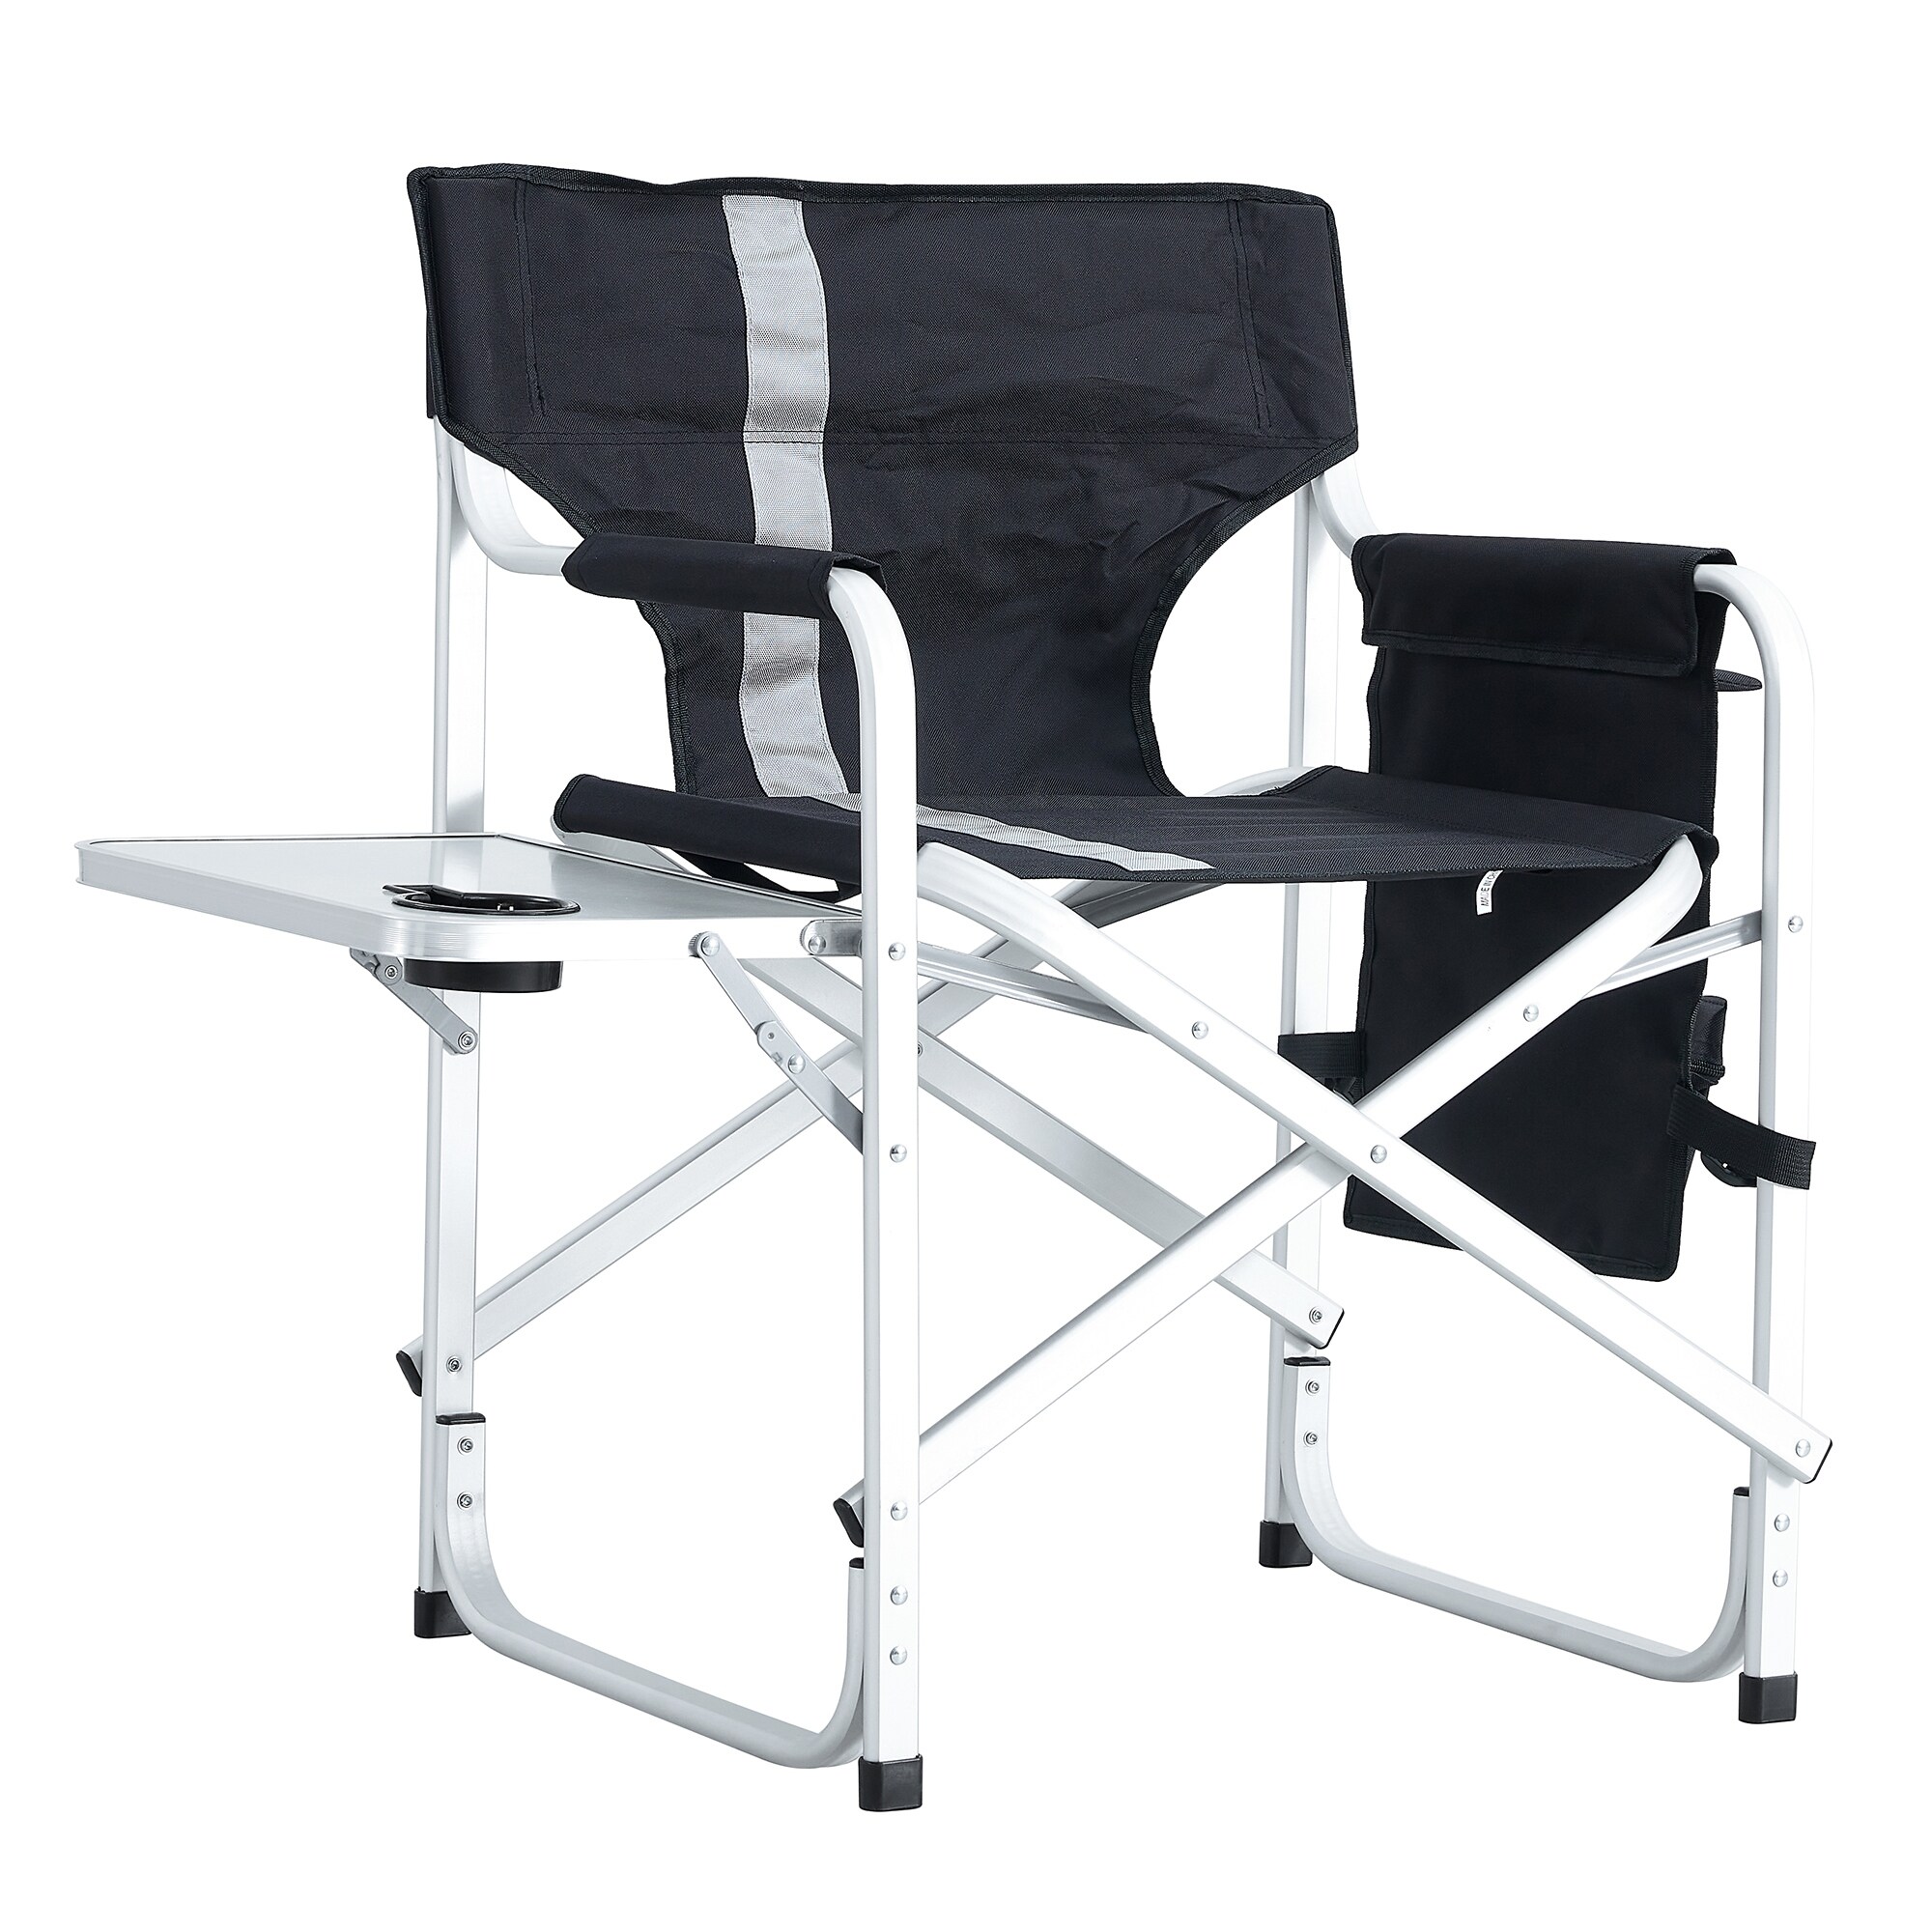 1-piece Padded Folding Outdoor Chair With Side Table And Storage Pockets